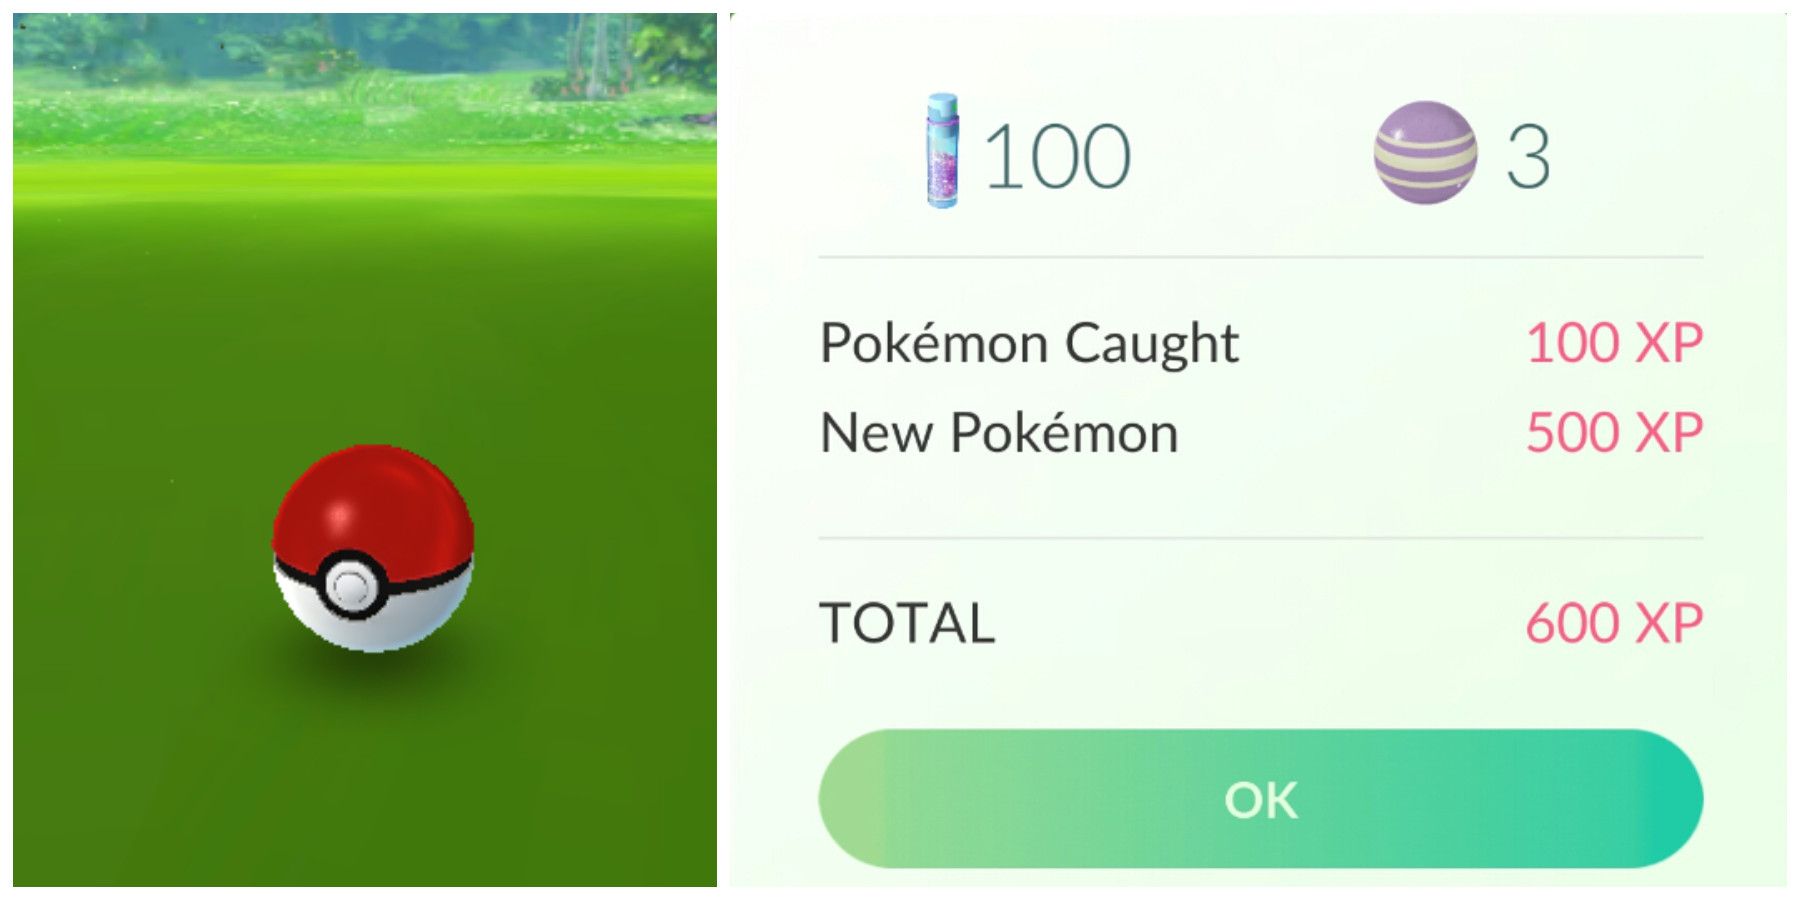 Pokemon GO': Tips and Tricks for Catching and Evolving